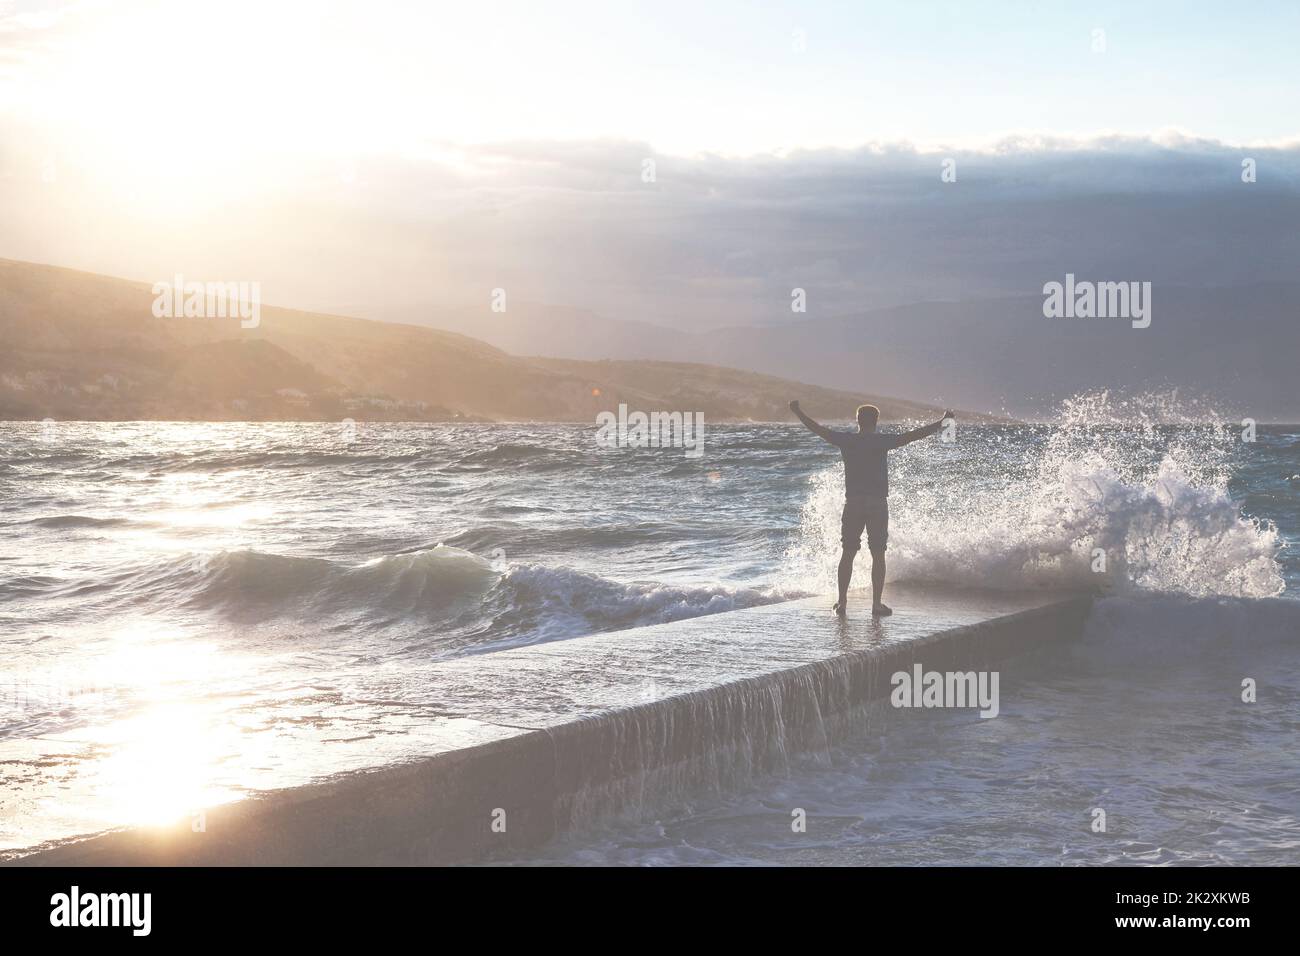 Big waves crushing on stone pier, on stormy weather. Stock Photo